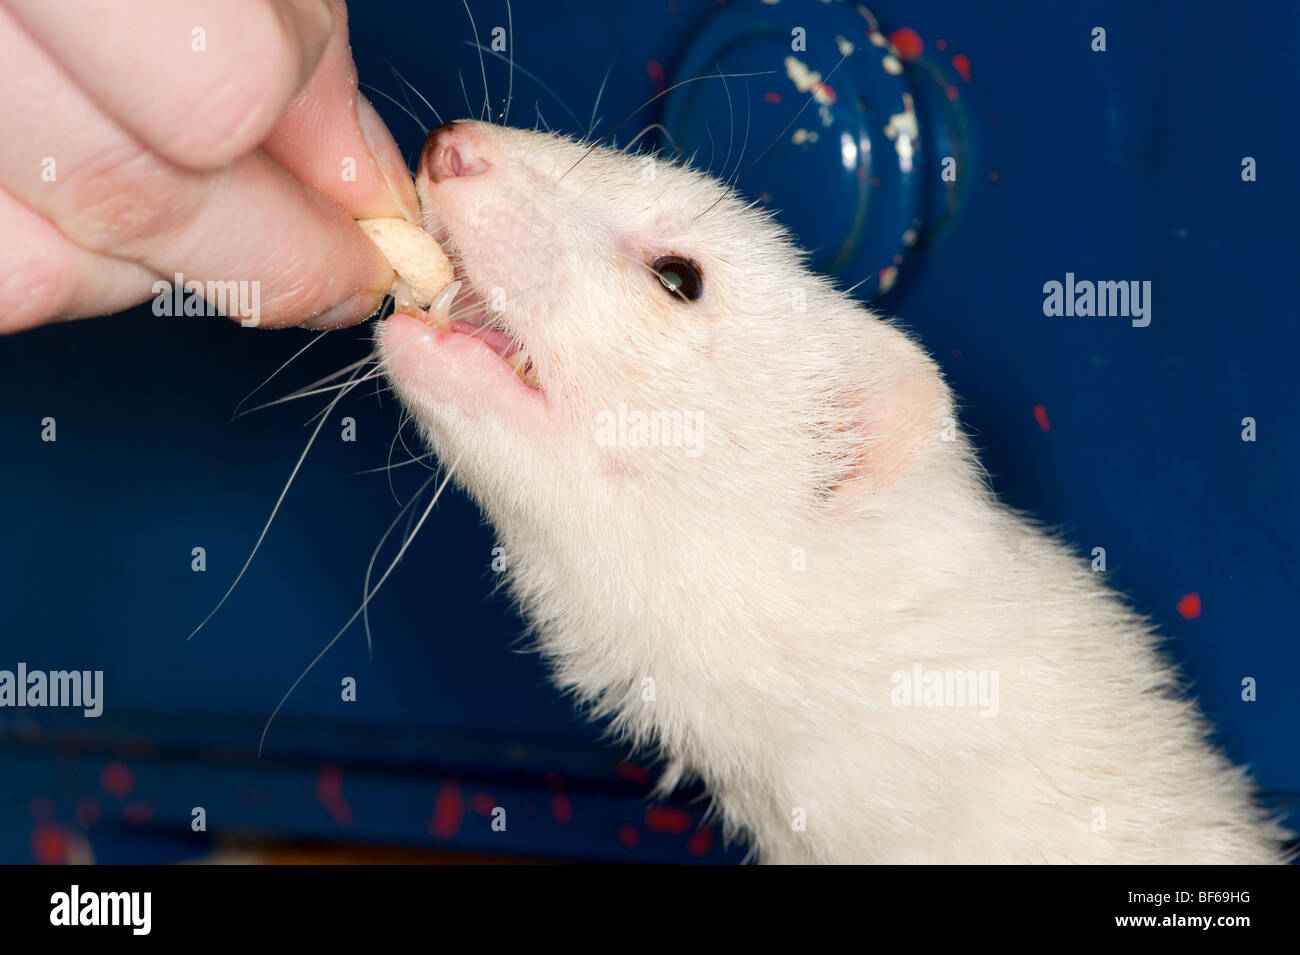 White ferret taking a cheerio from a persons fingers Stock Photo